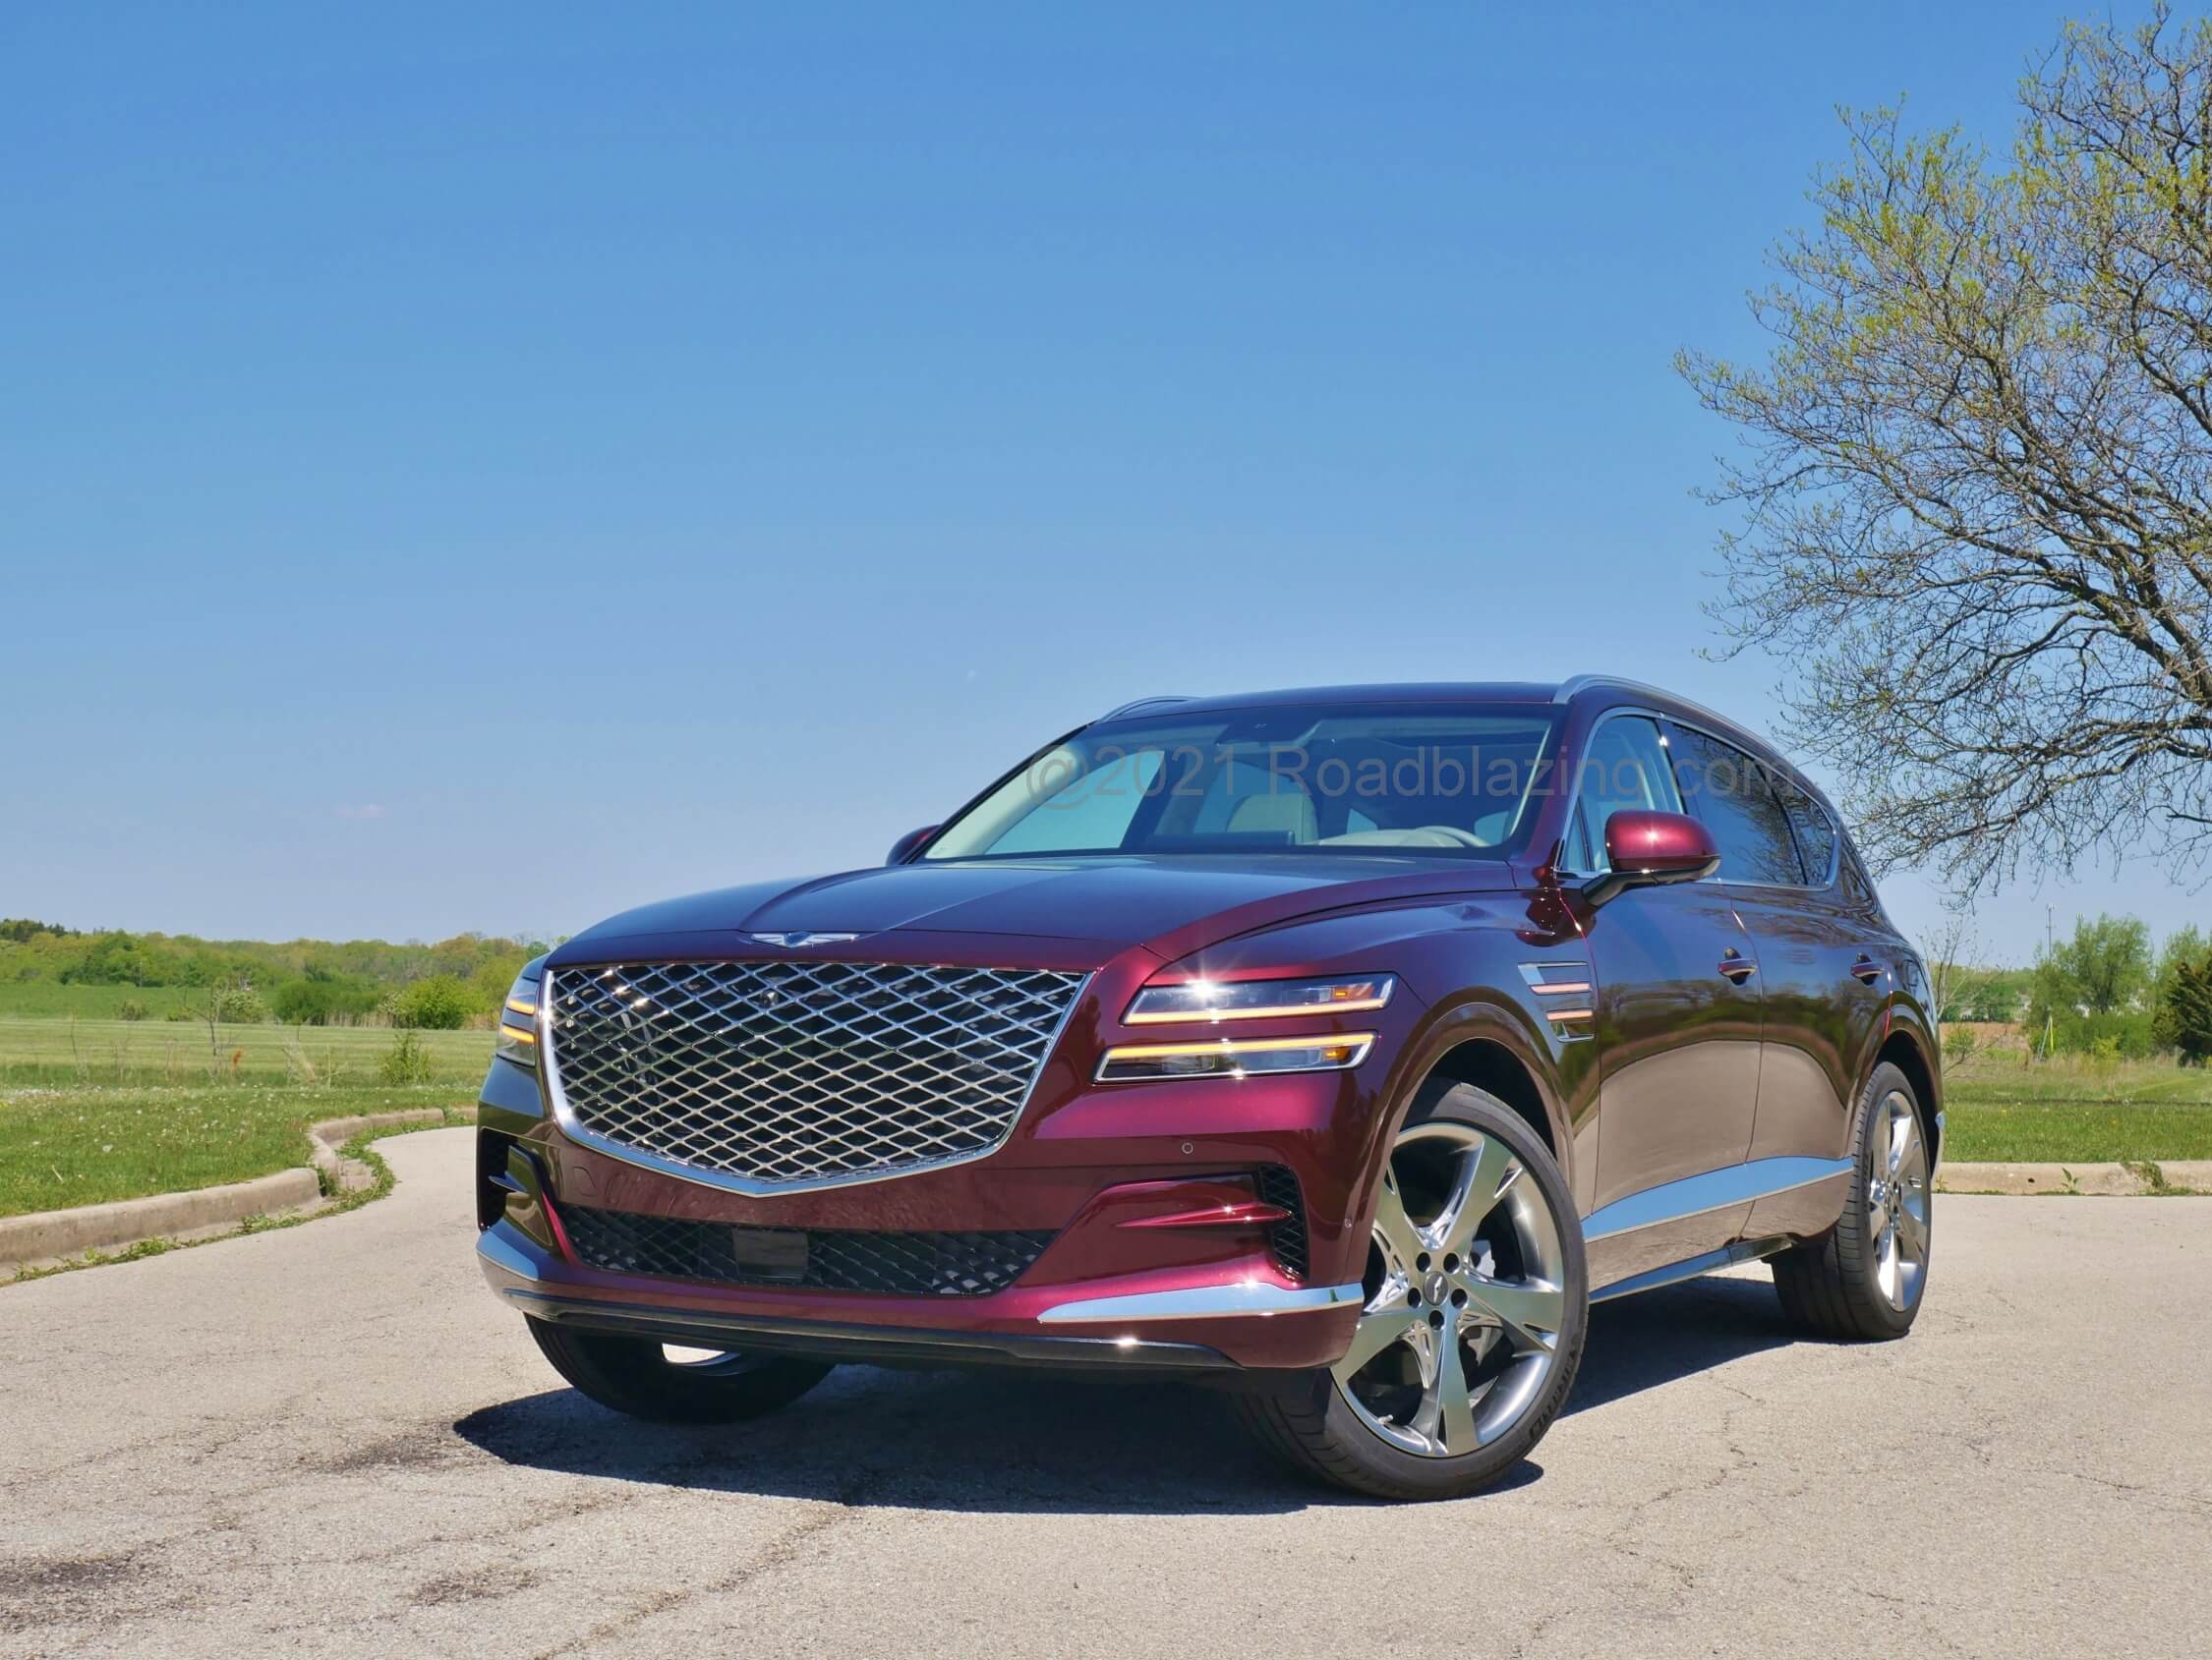 2021 Genesis GV80 2.5T AWD: new corporate deep diamond cradle lattice grille and tandem lateral LED directionals = Bling.